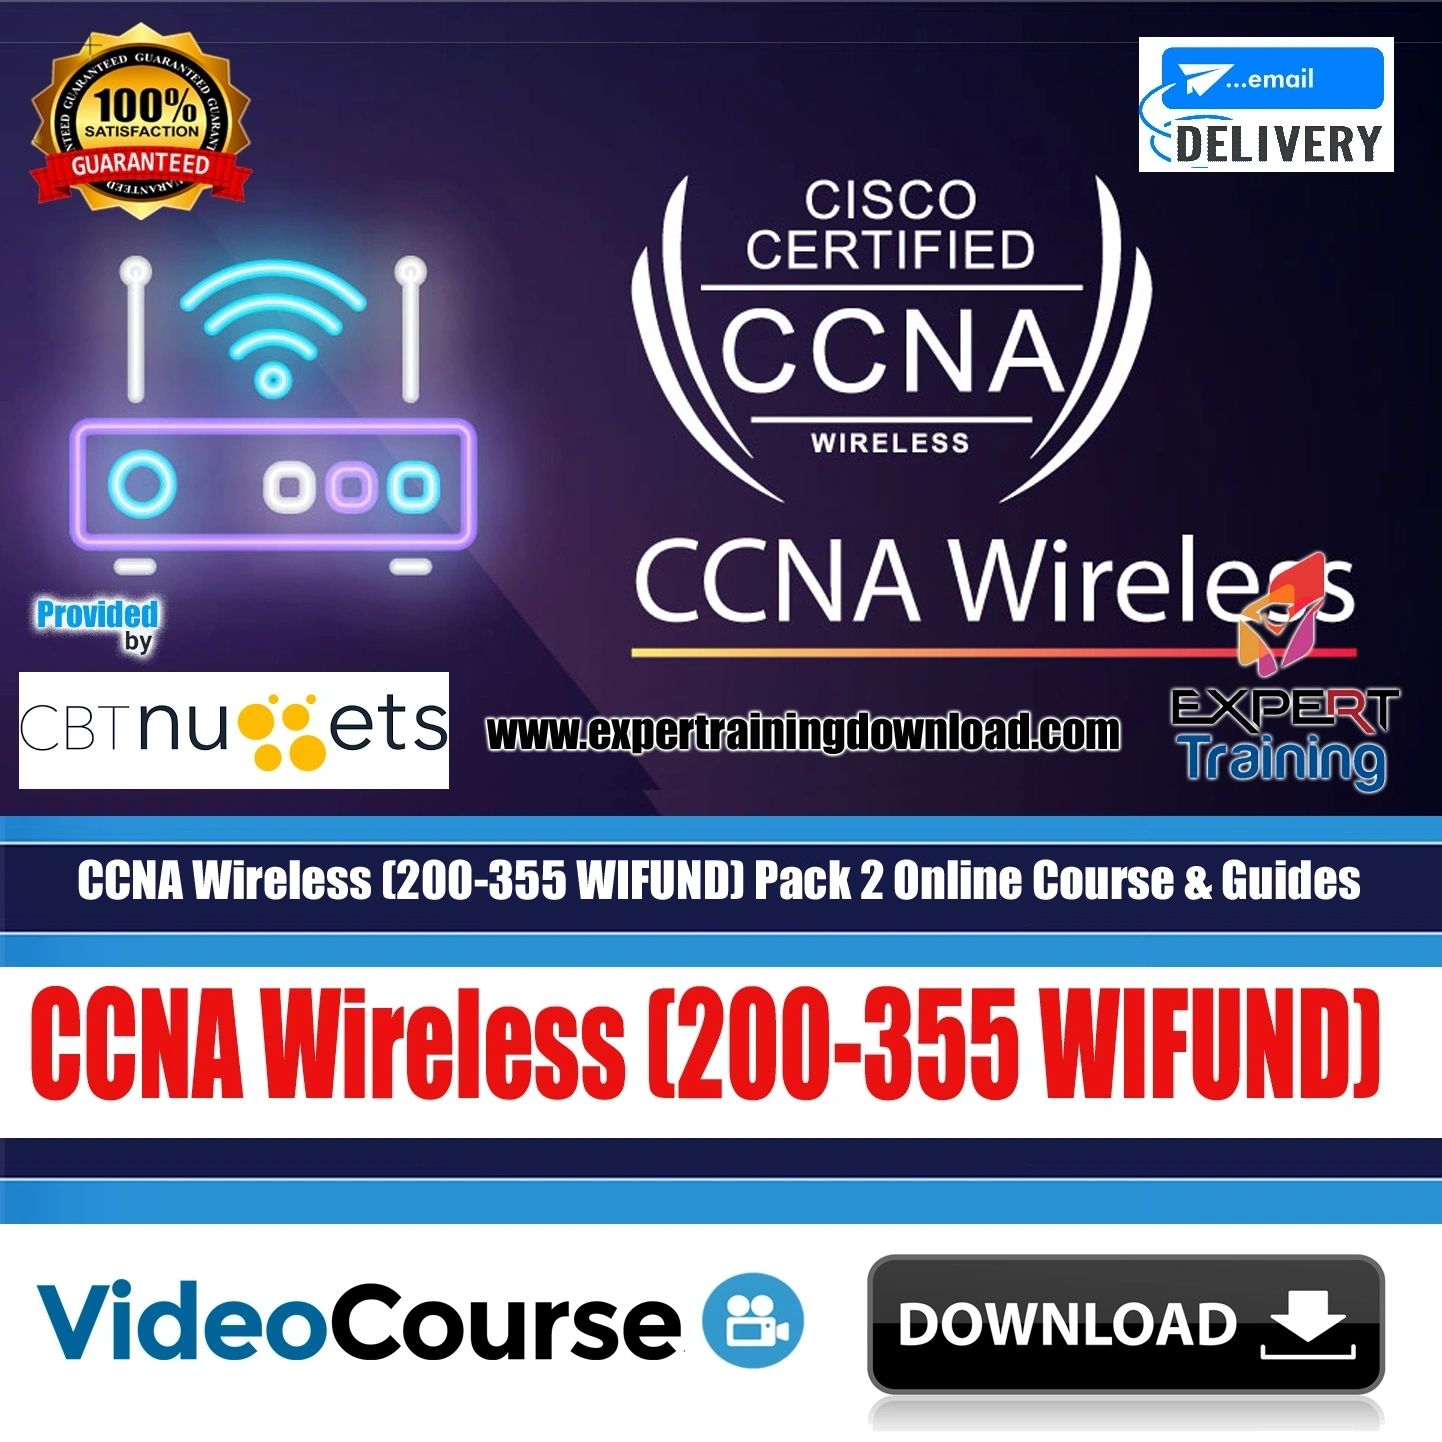 CCNA Wireless (200-355 WIFUND) Pack of 2 Online Course & PDF Guides